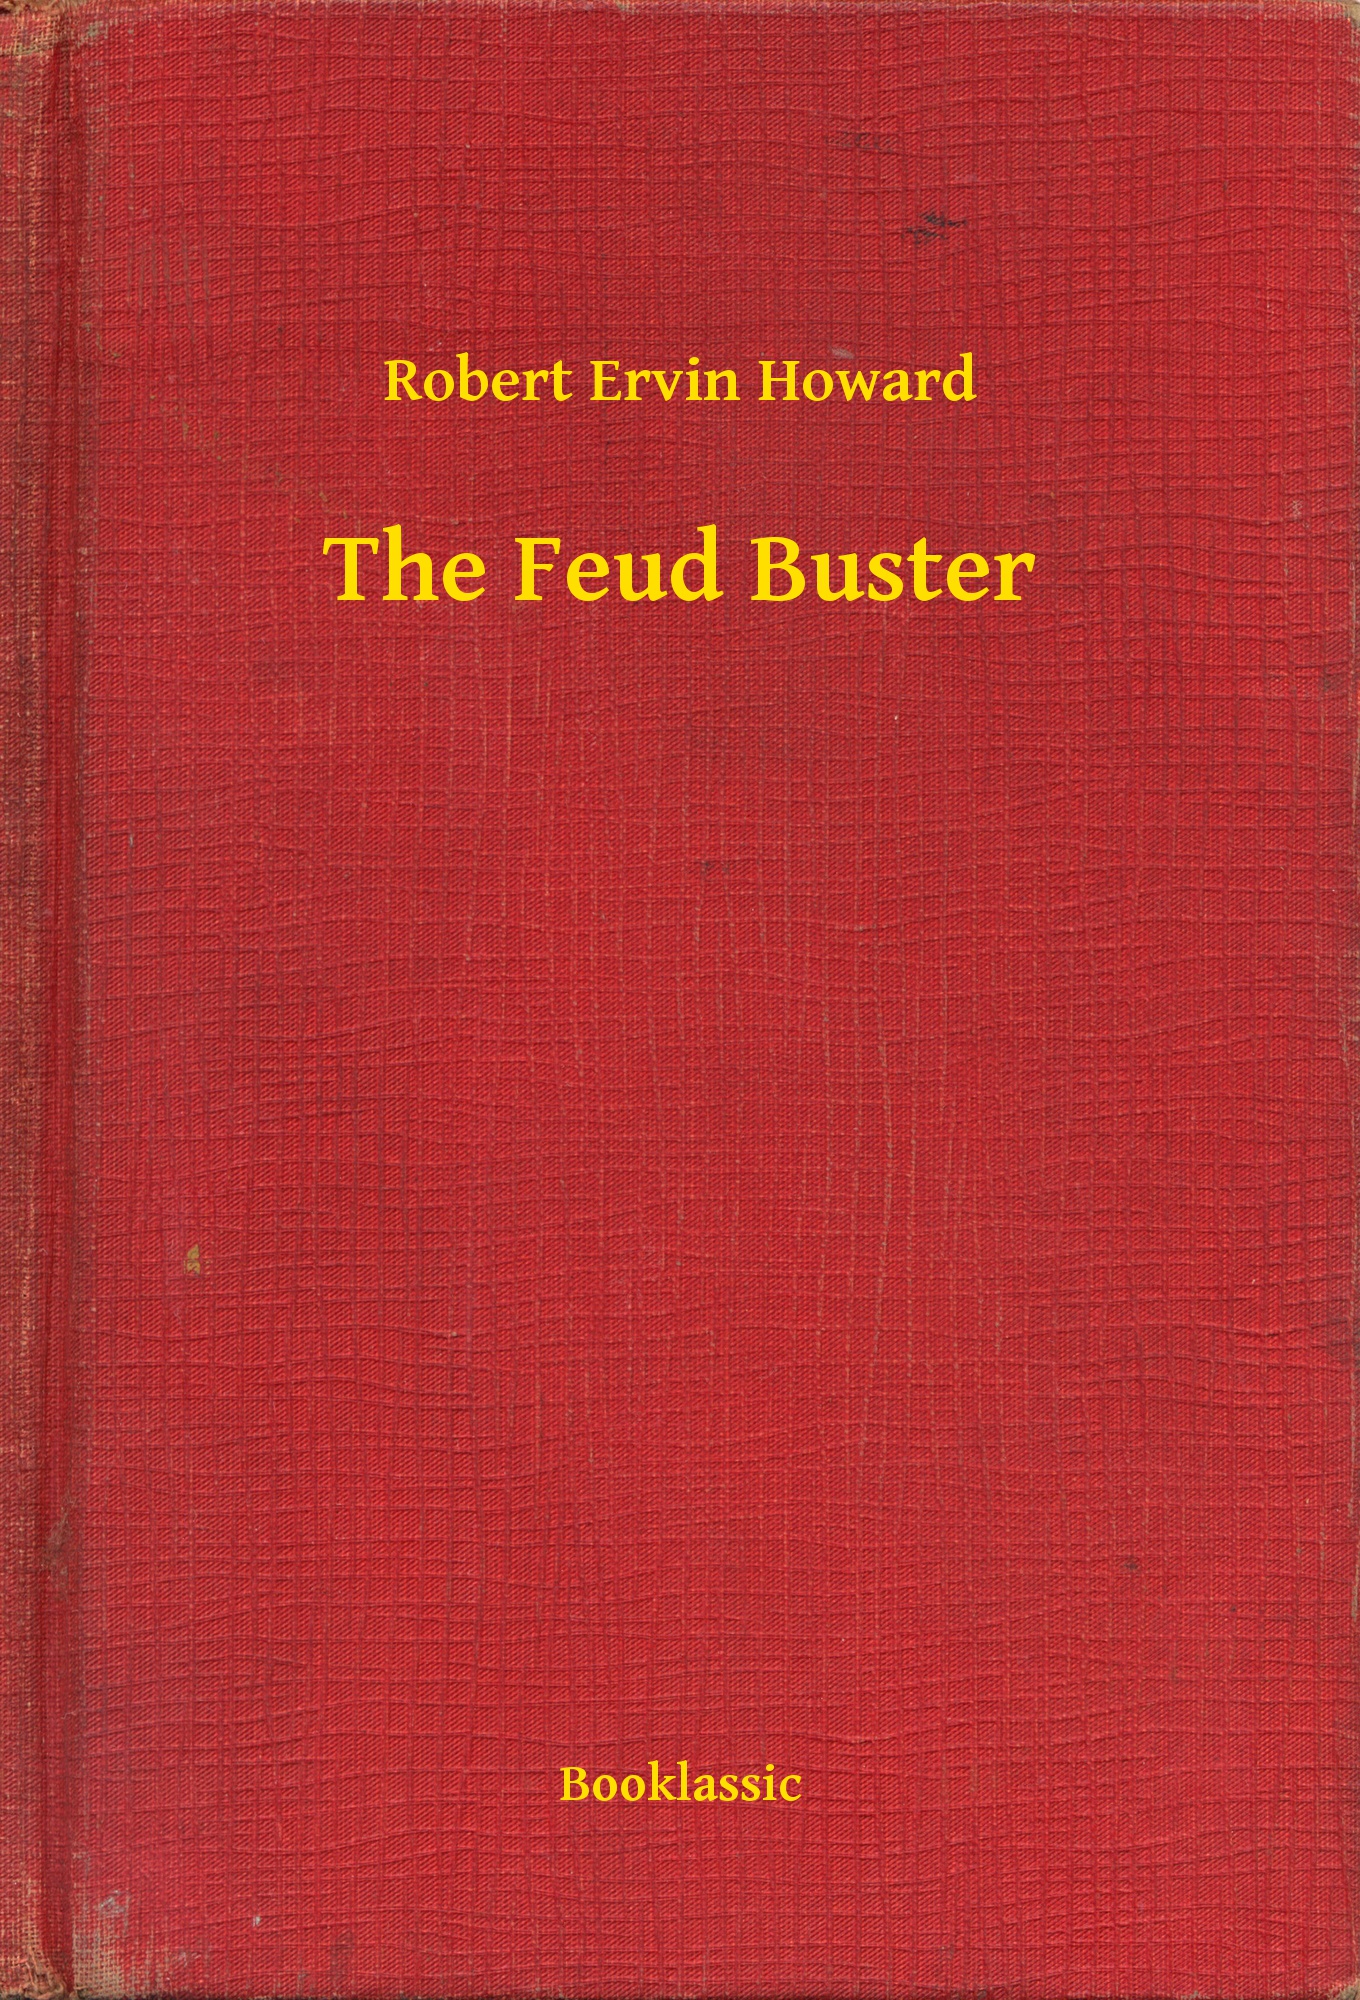 The Feud Buster